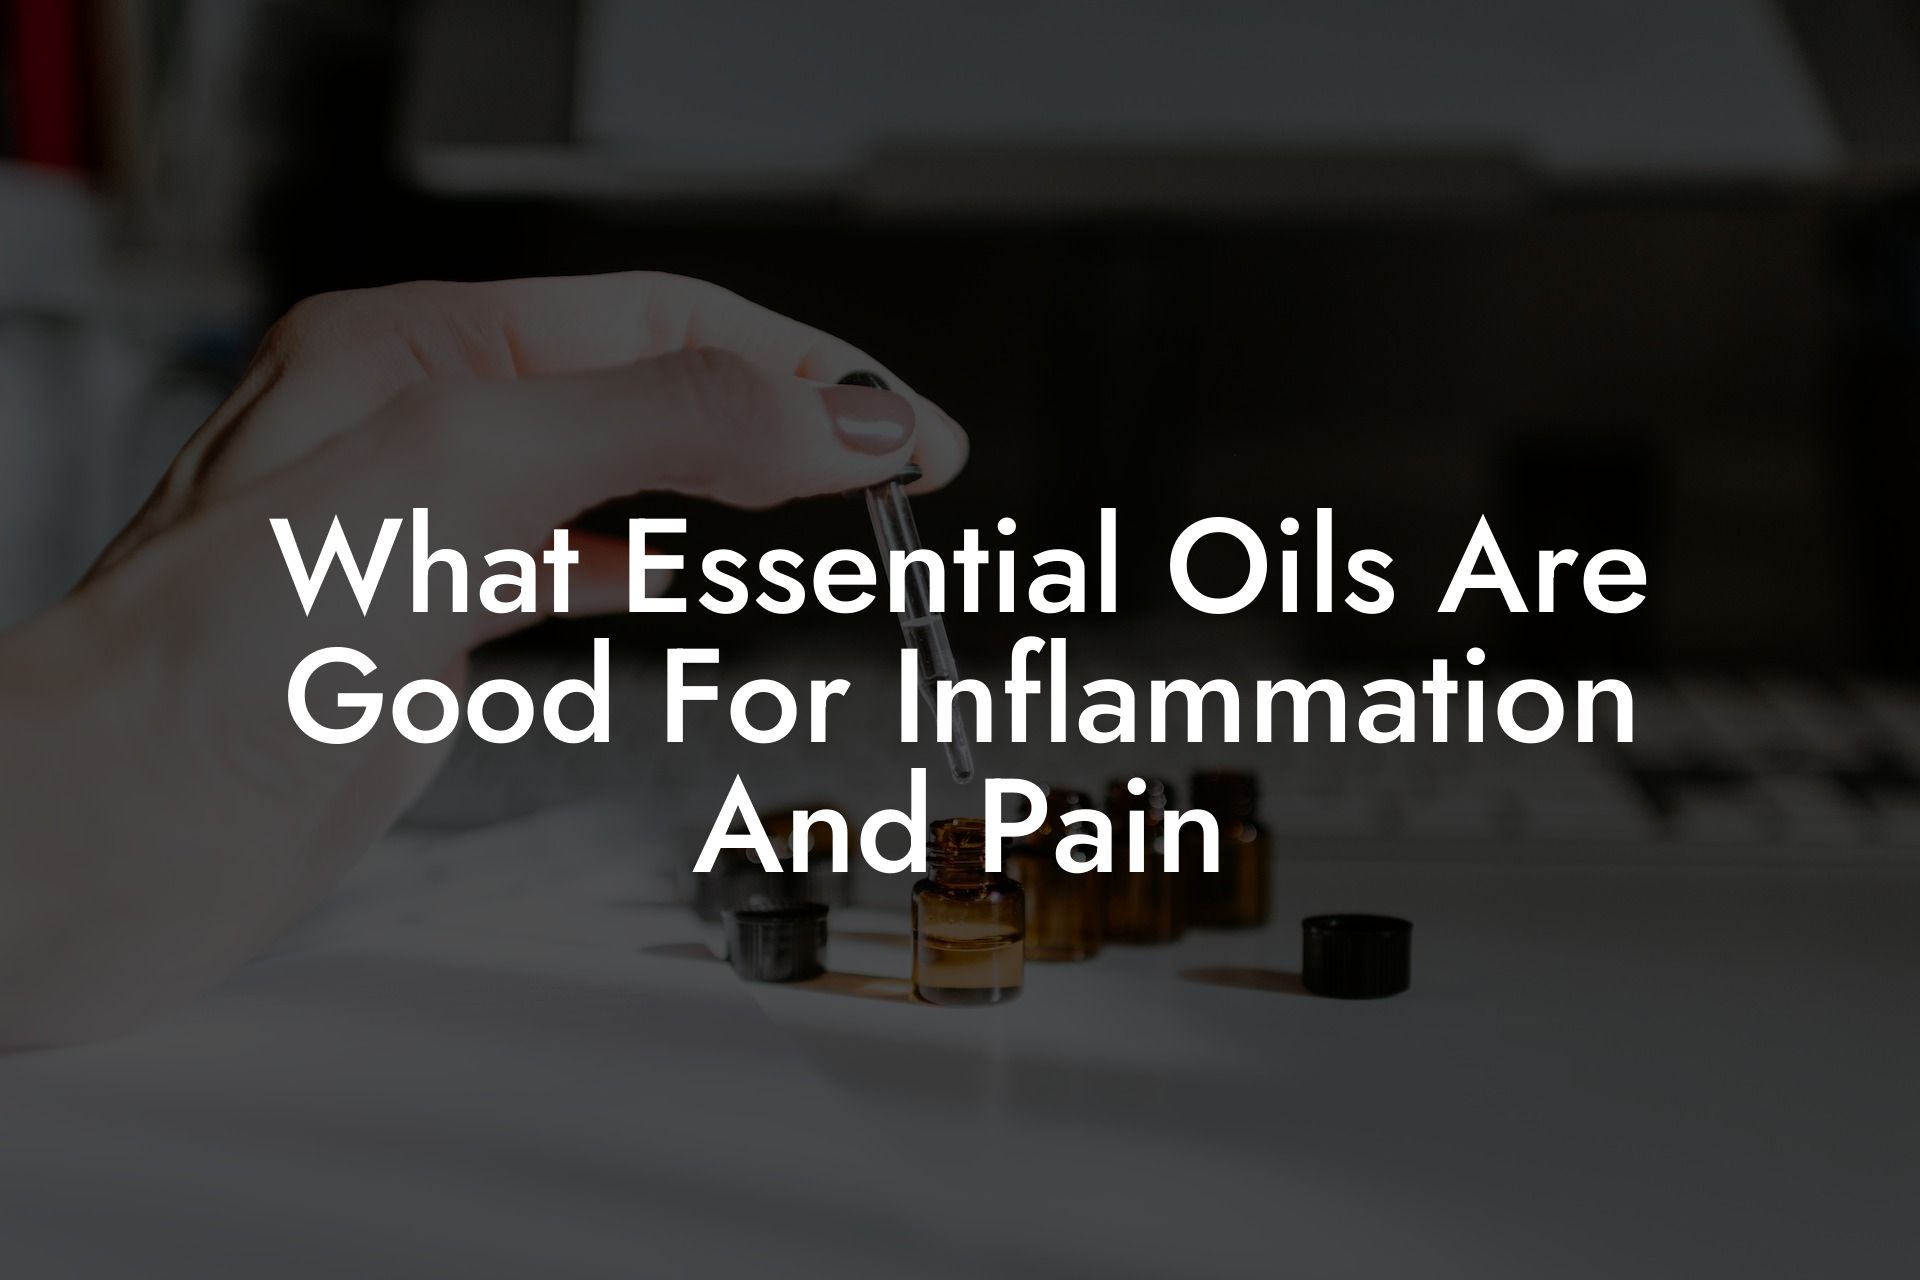 What Essential Oils Are Good For Inflammation And Pain